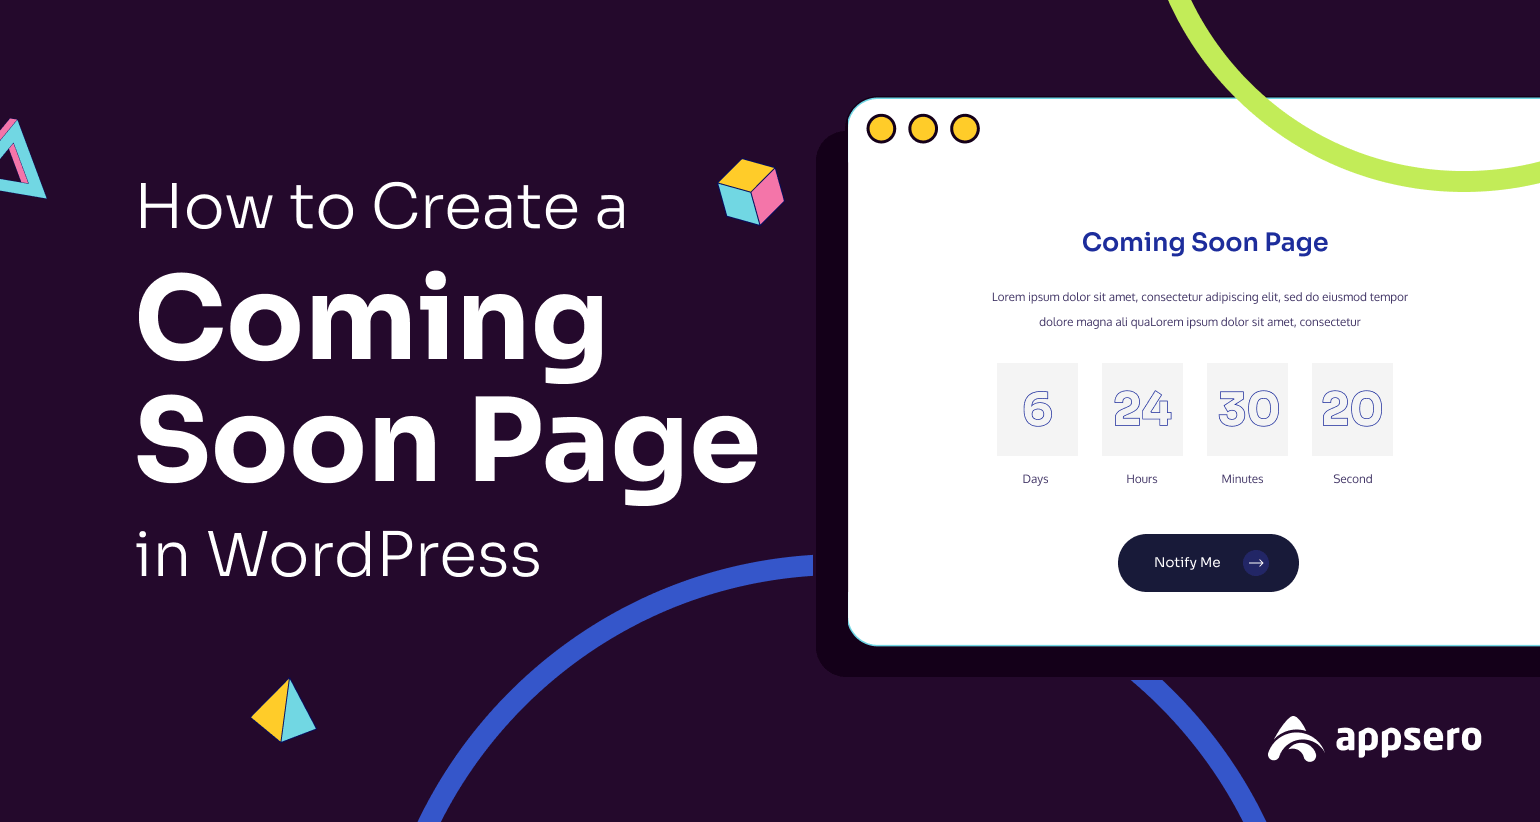 Benefits of Creating a Coming Soon Page